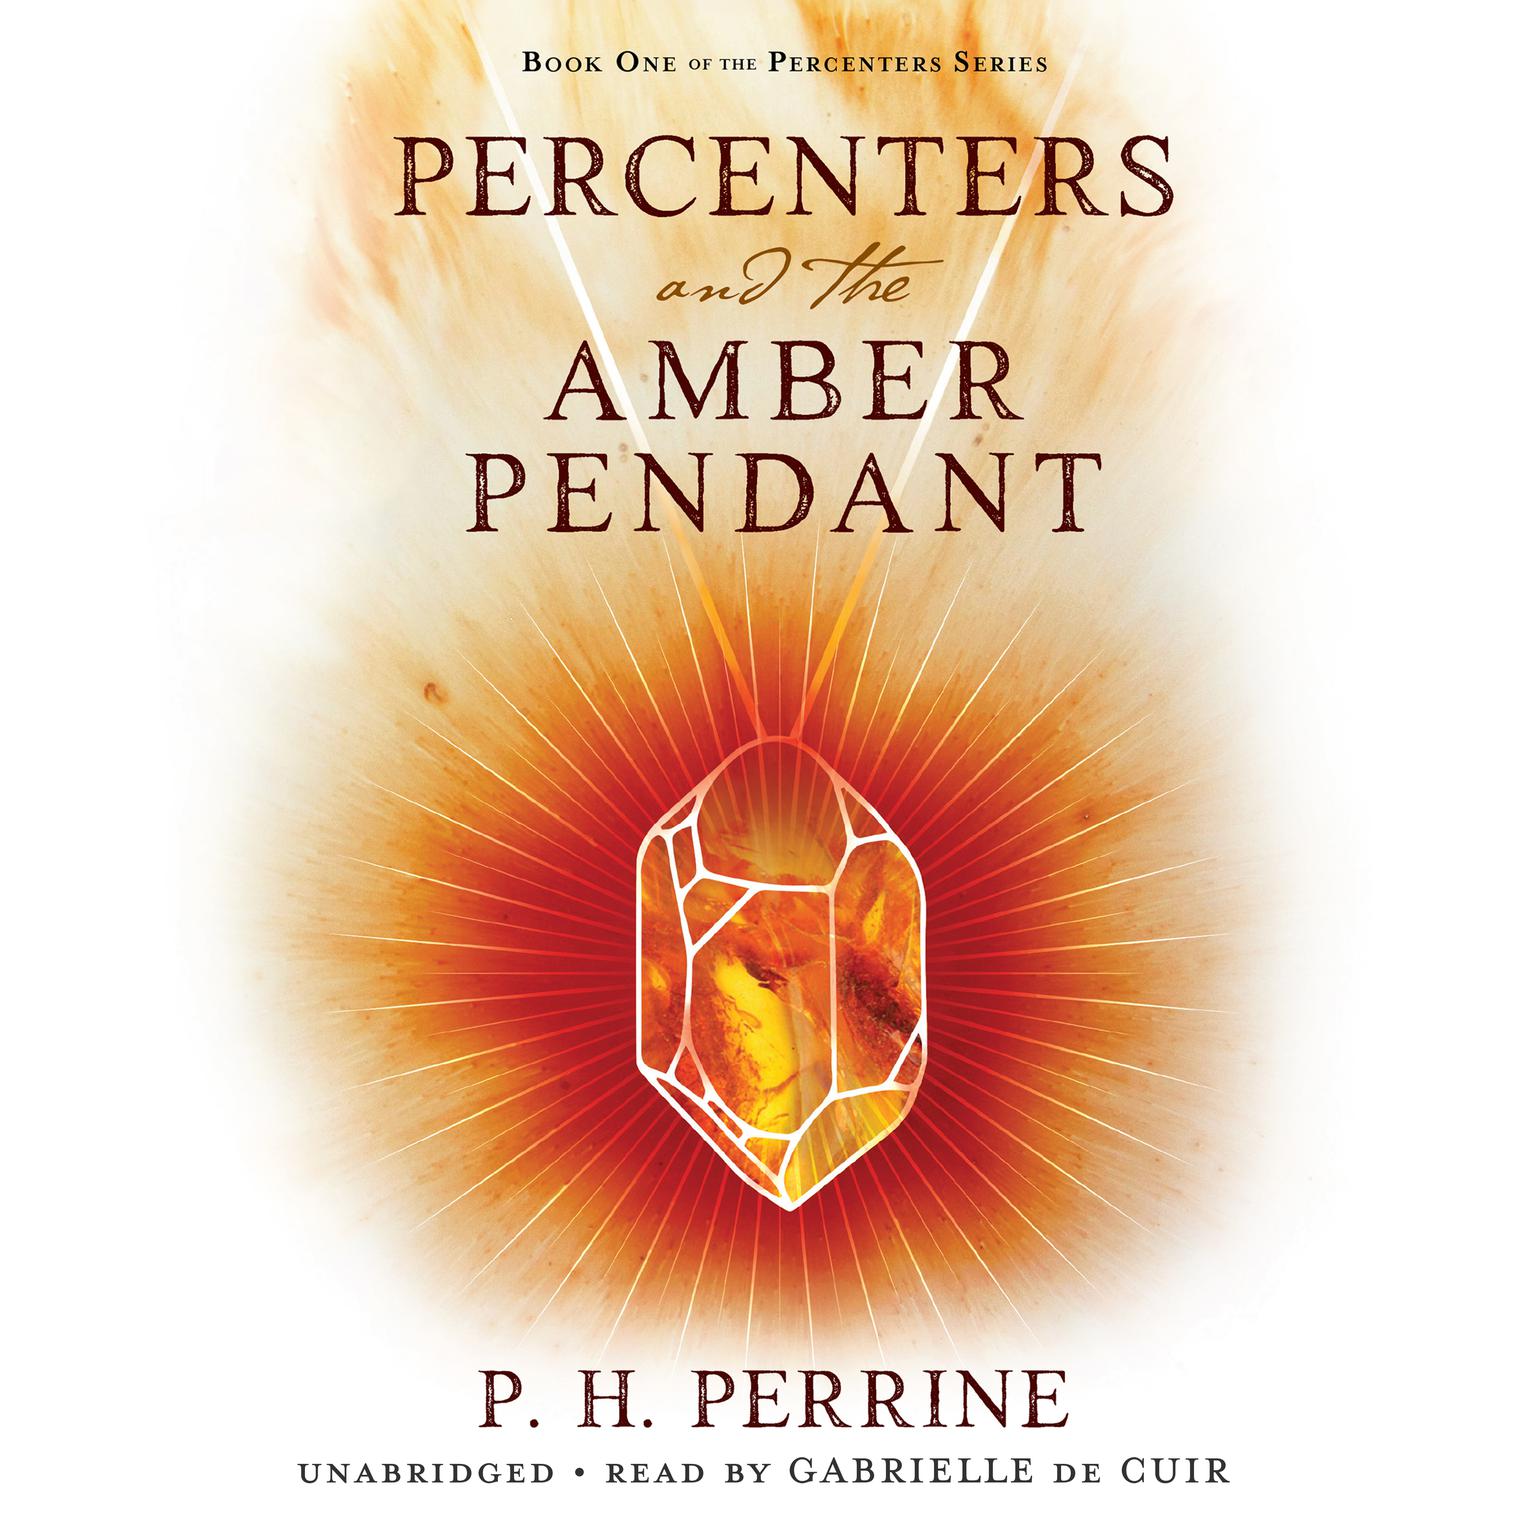 Percenters and the Amber Pendant Audiobook, by P. H. Perrine